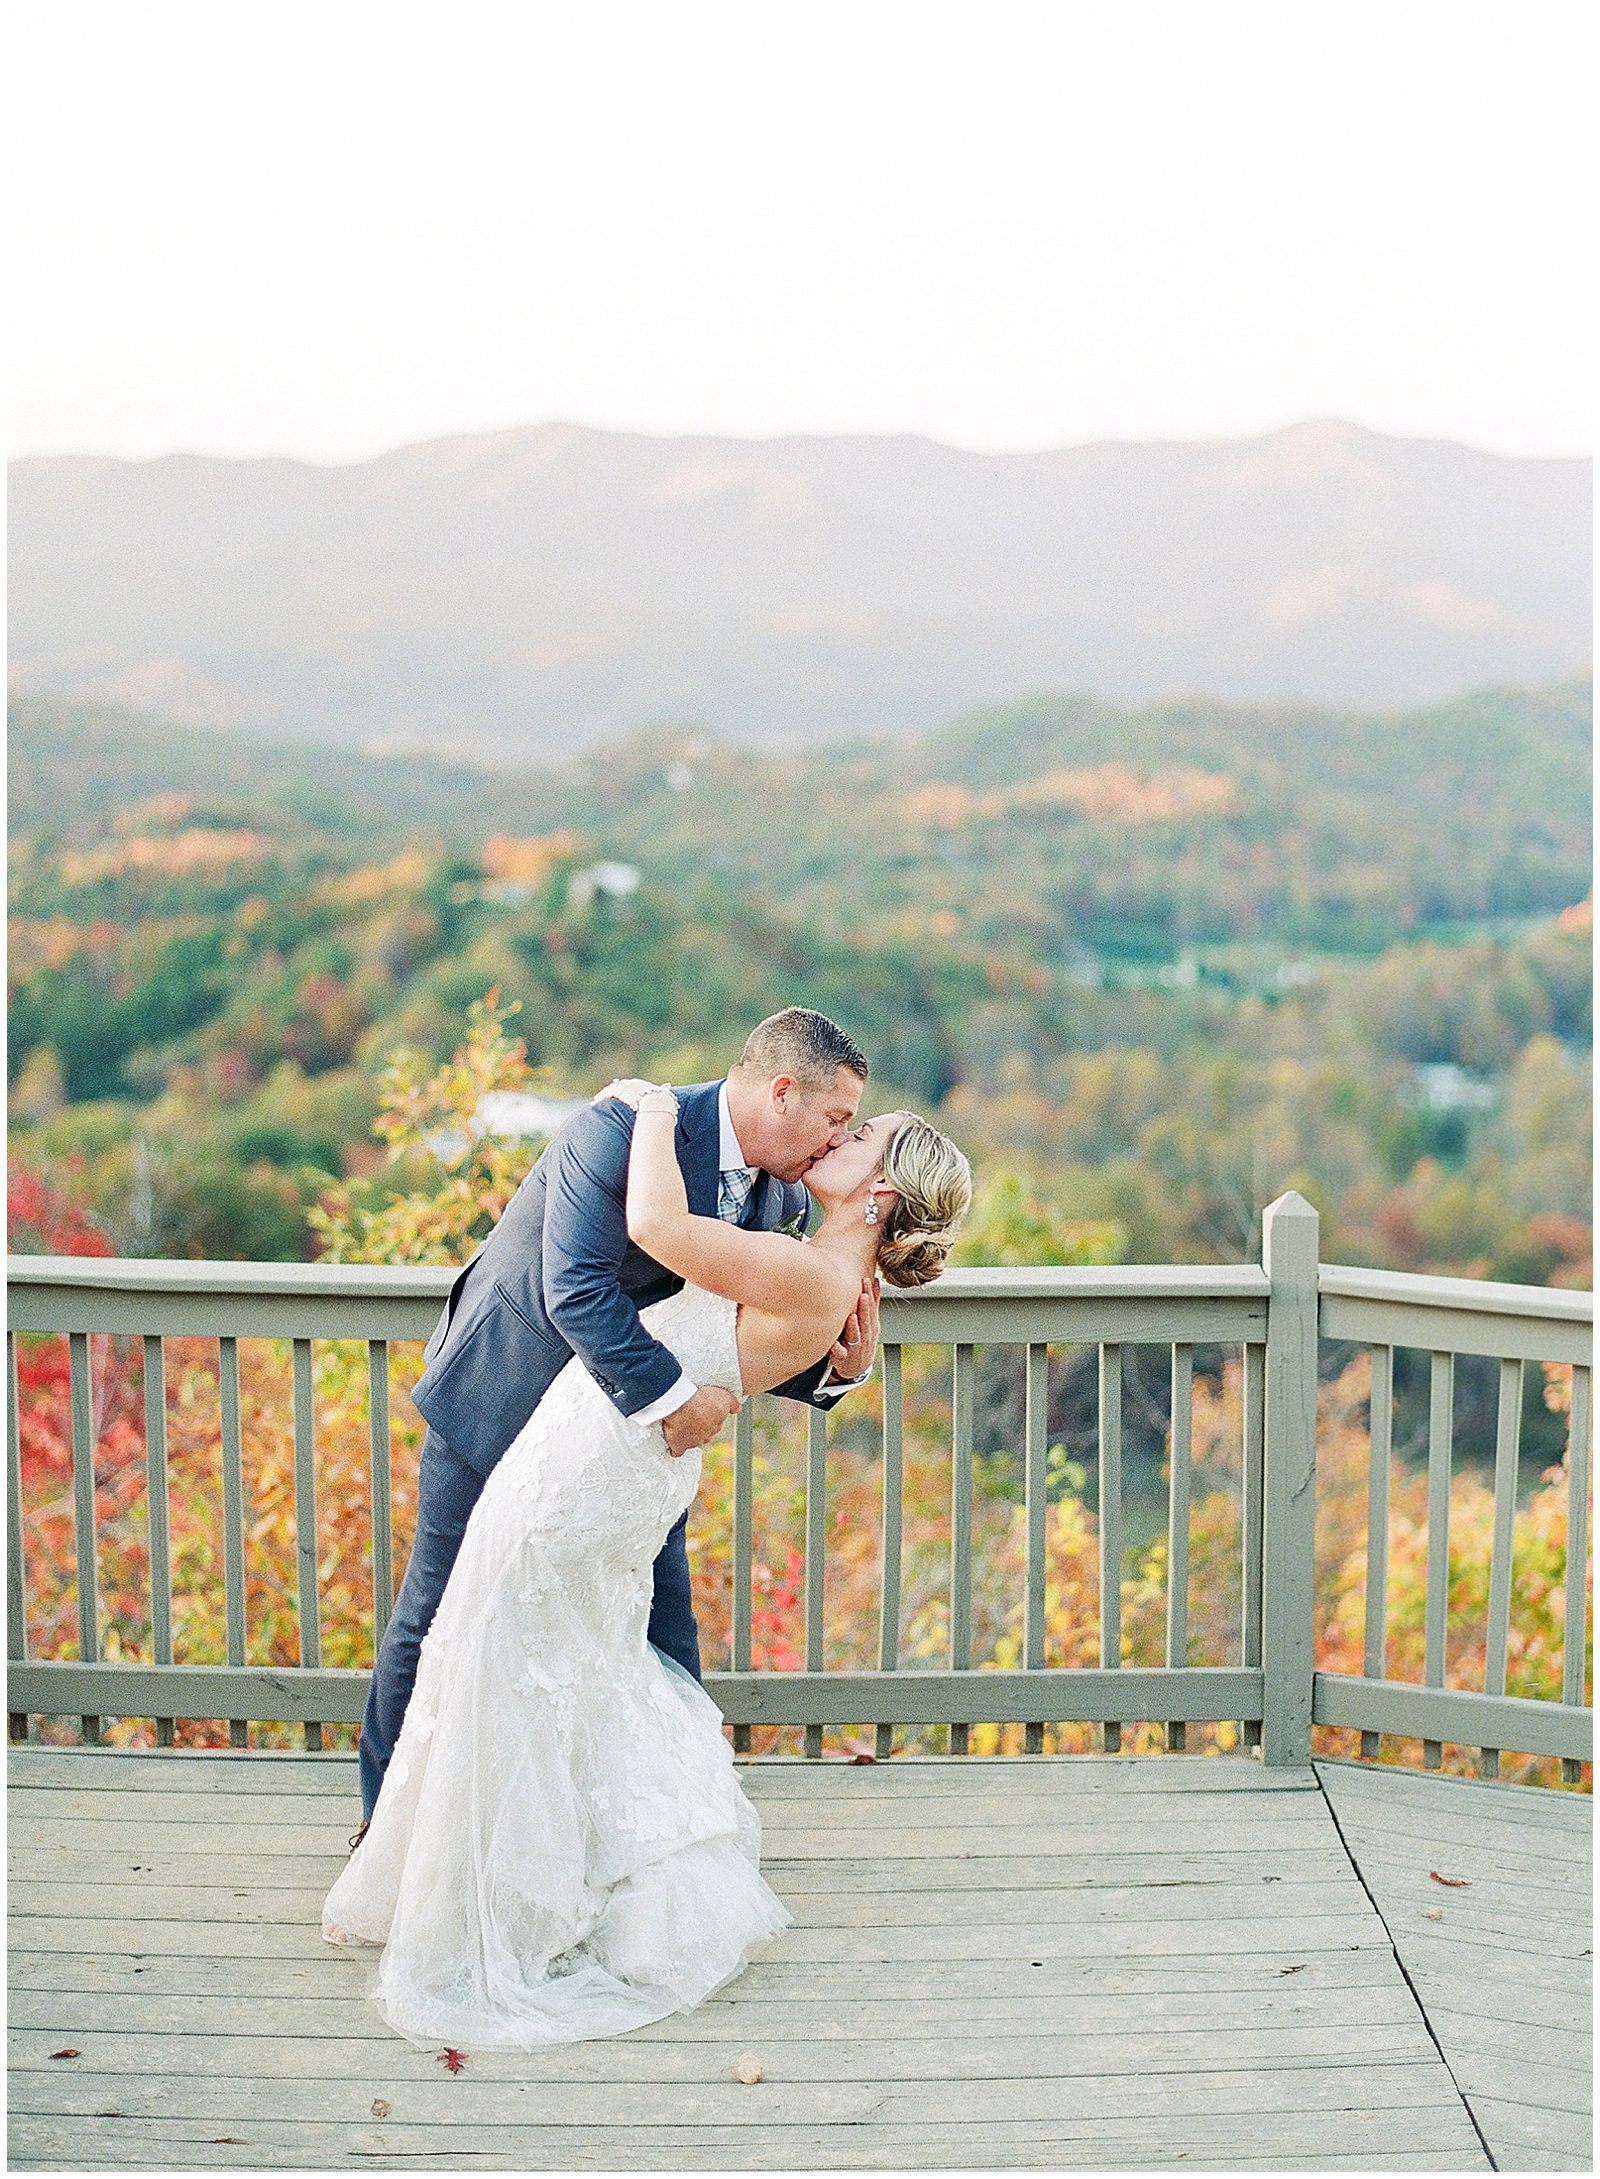 Fall Hawkesdene Wedding Bride and Groom with Mountains in Background Photo